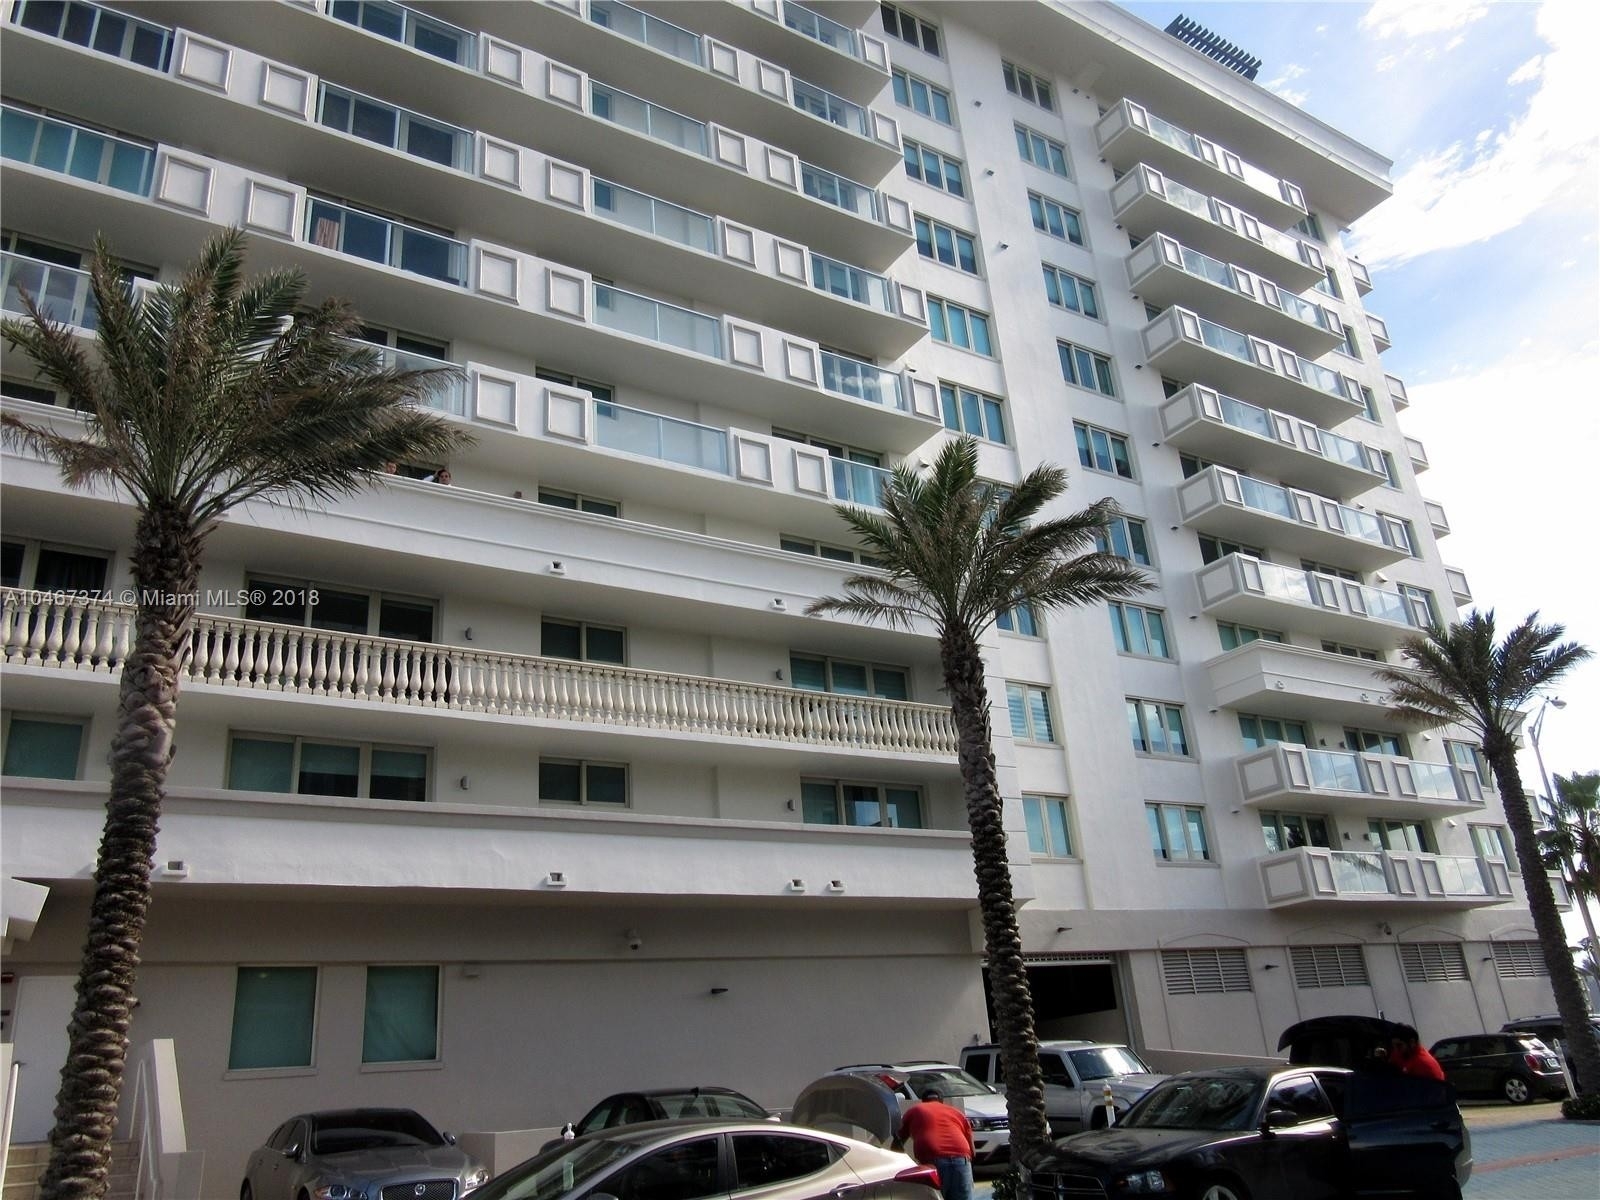 38. Condominiums at 9499 Collins Ave, 508 Surfside